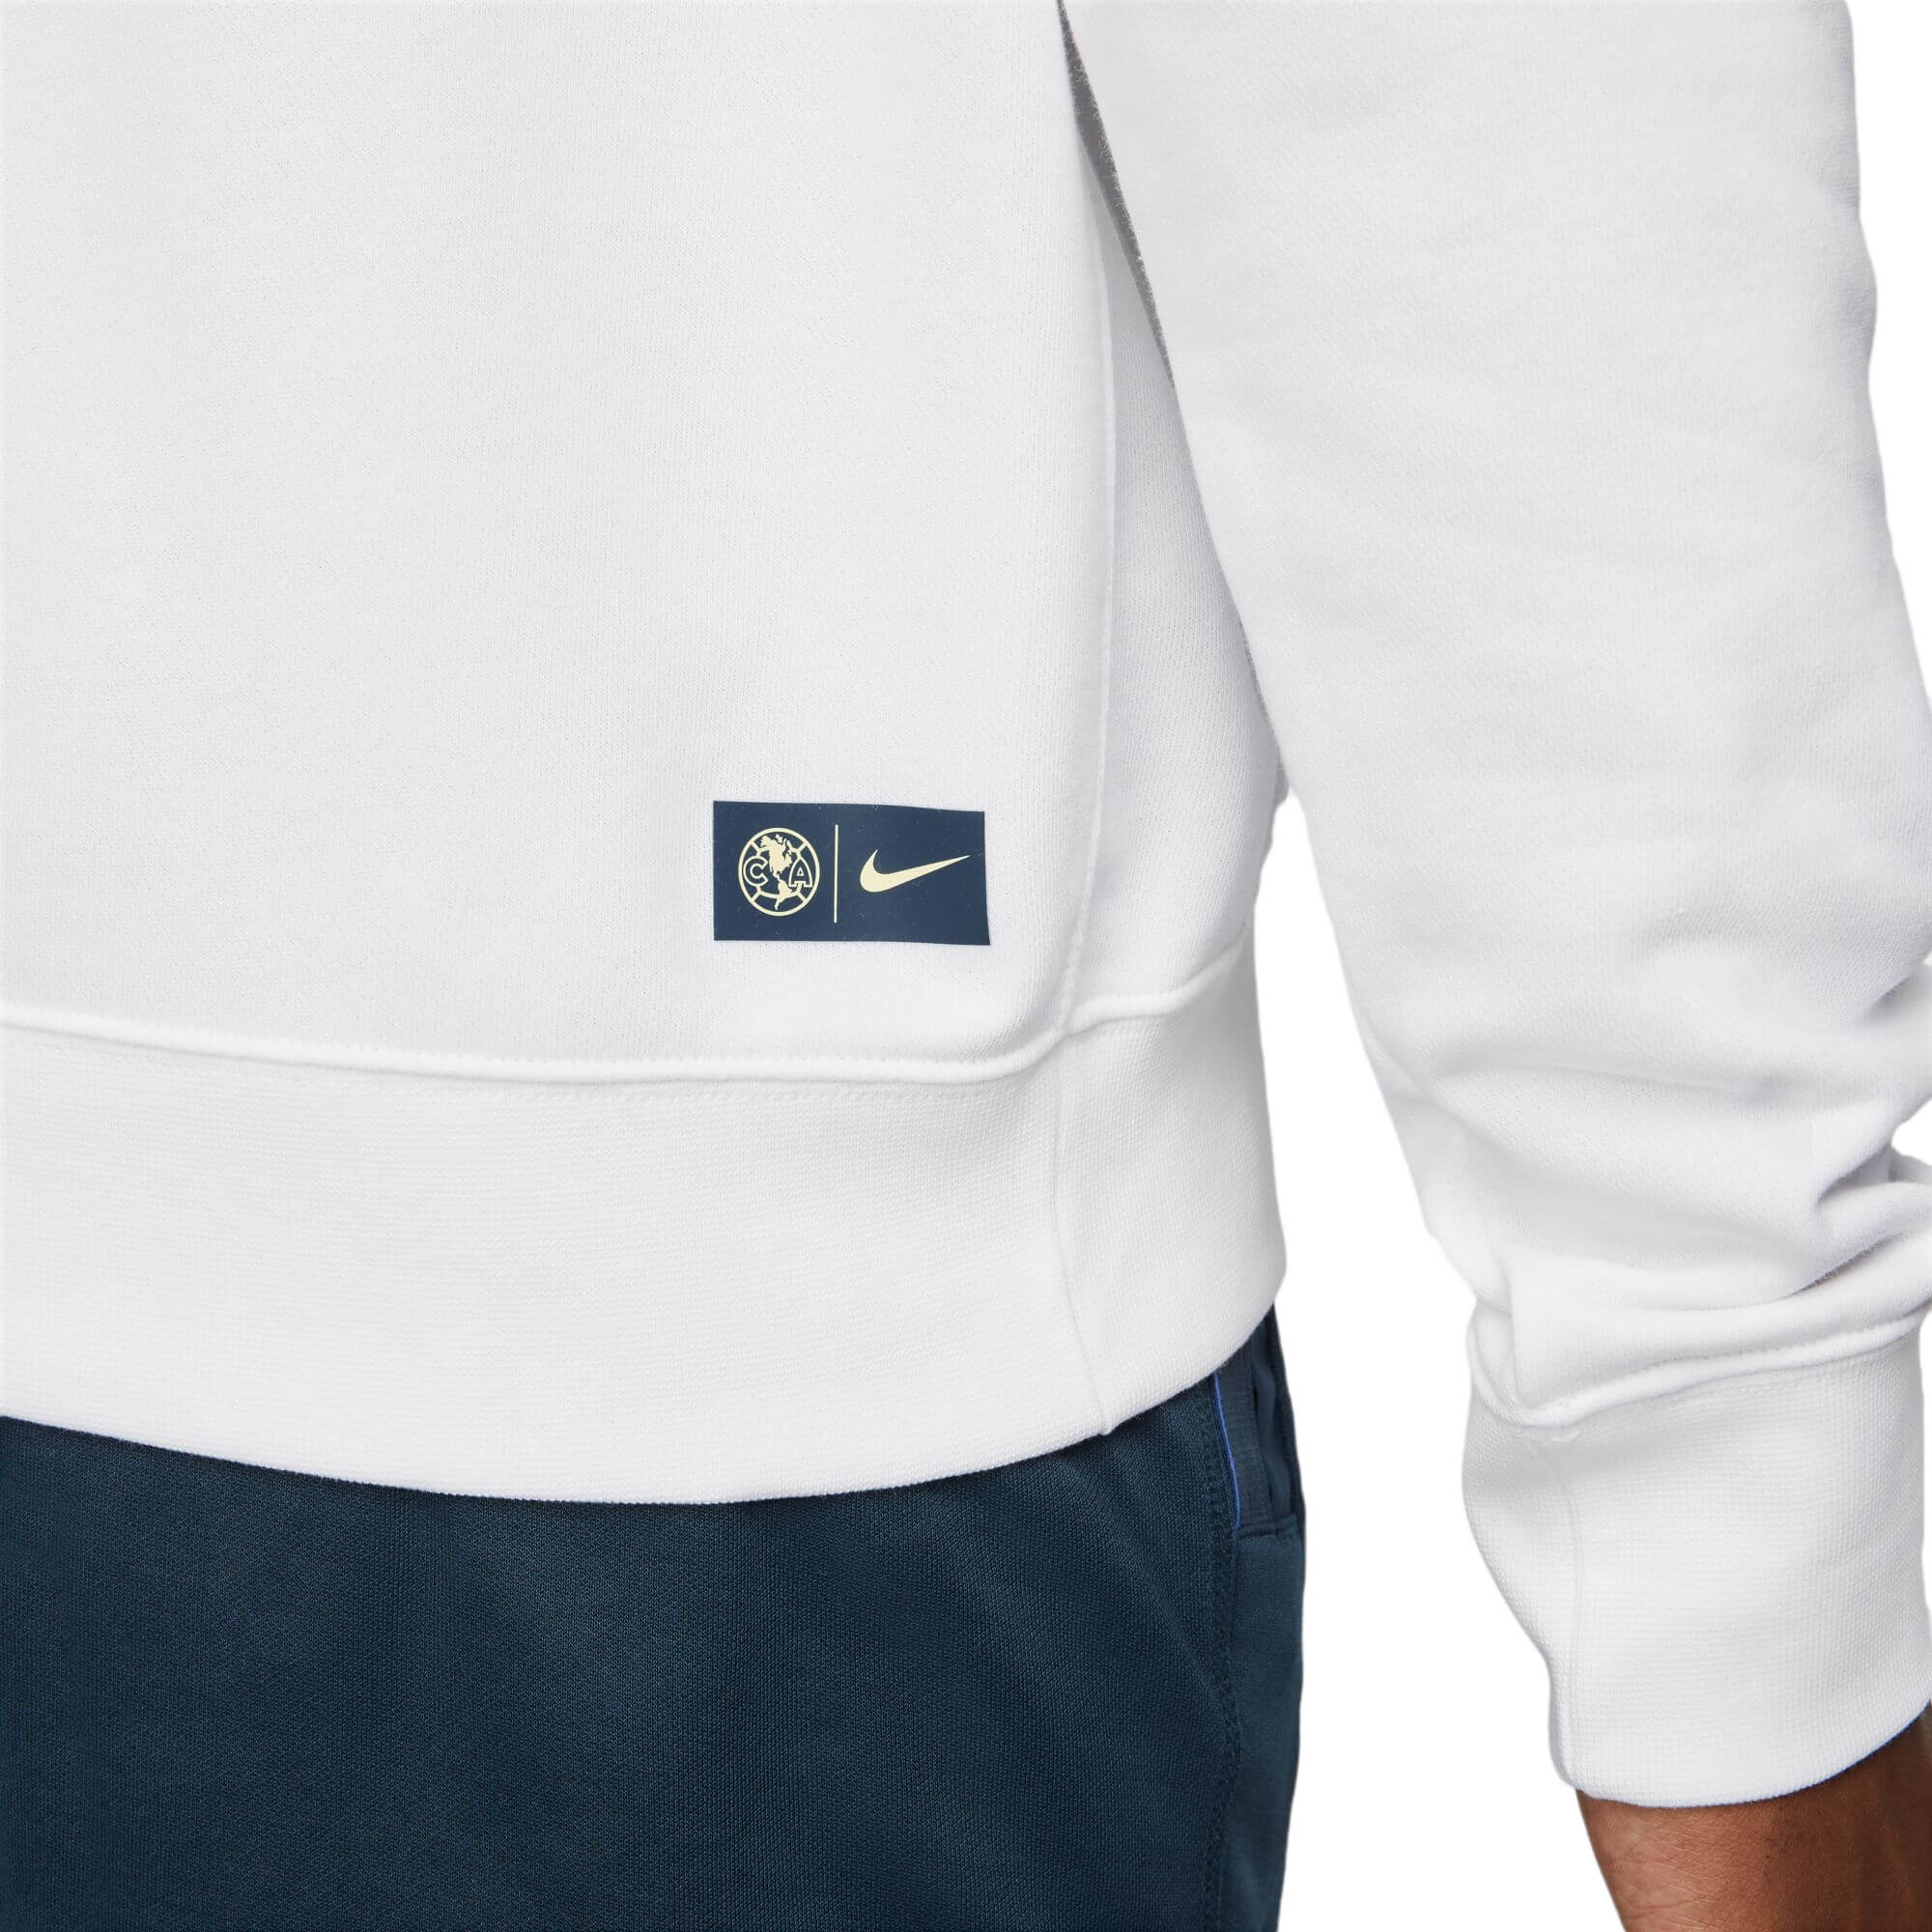 Pumas UNAM Club Men's Nike Soccer French Terry Pullover Hoodie